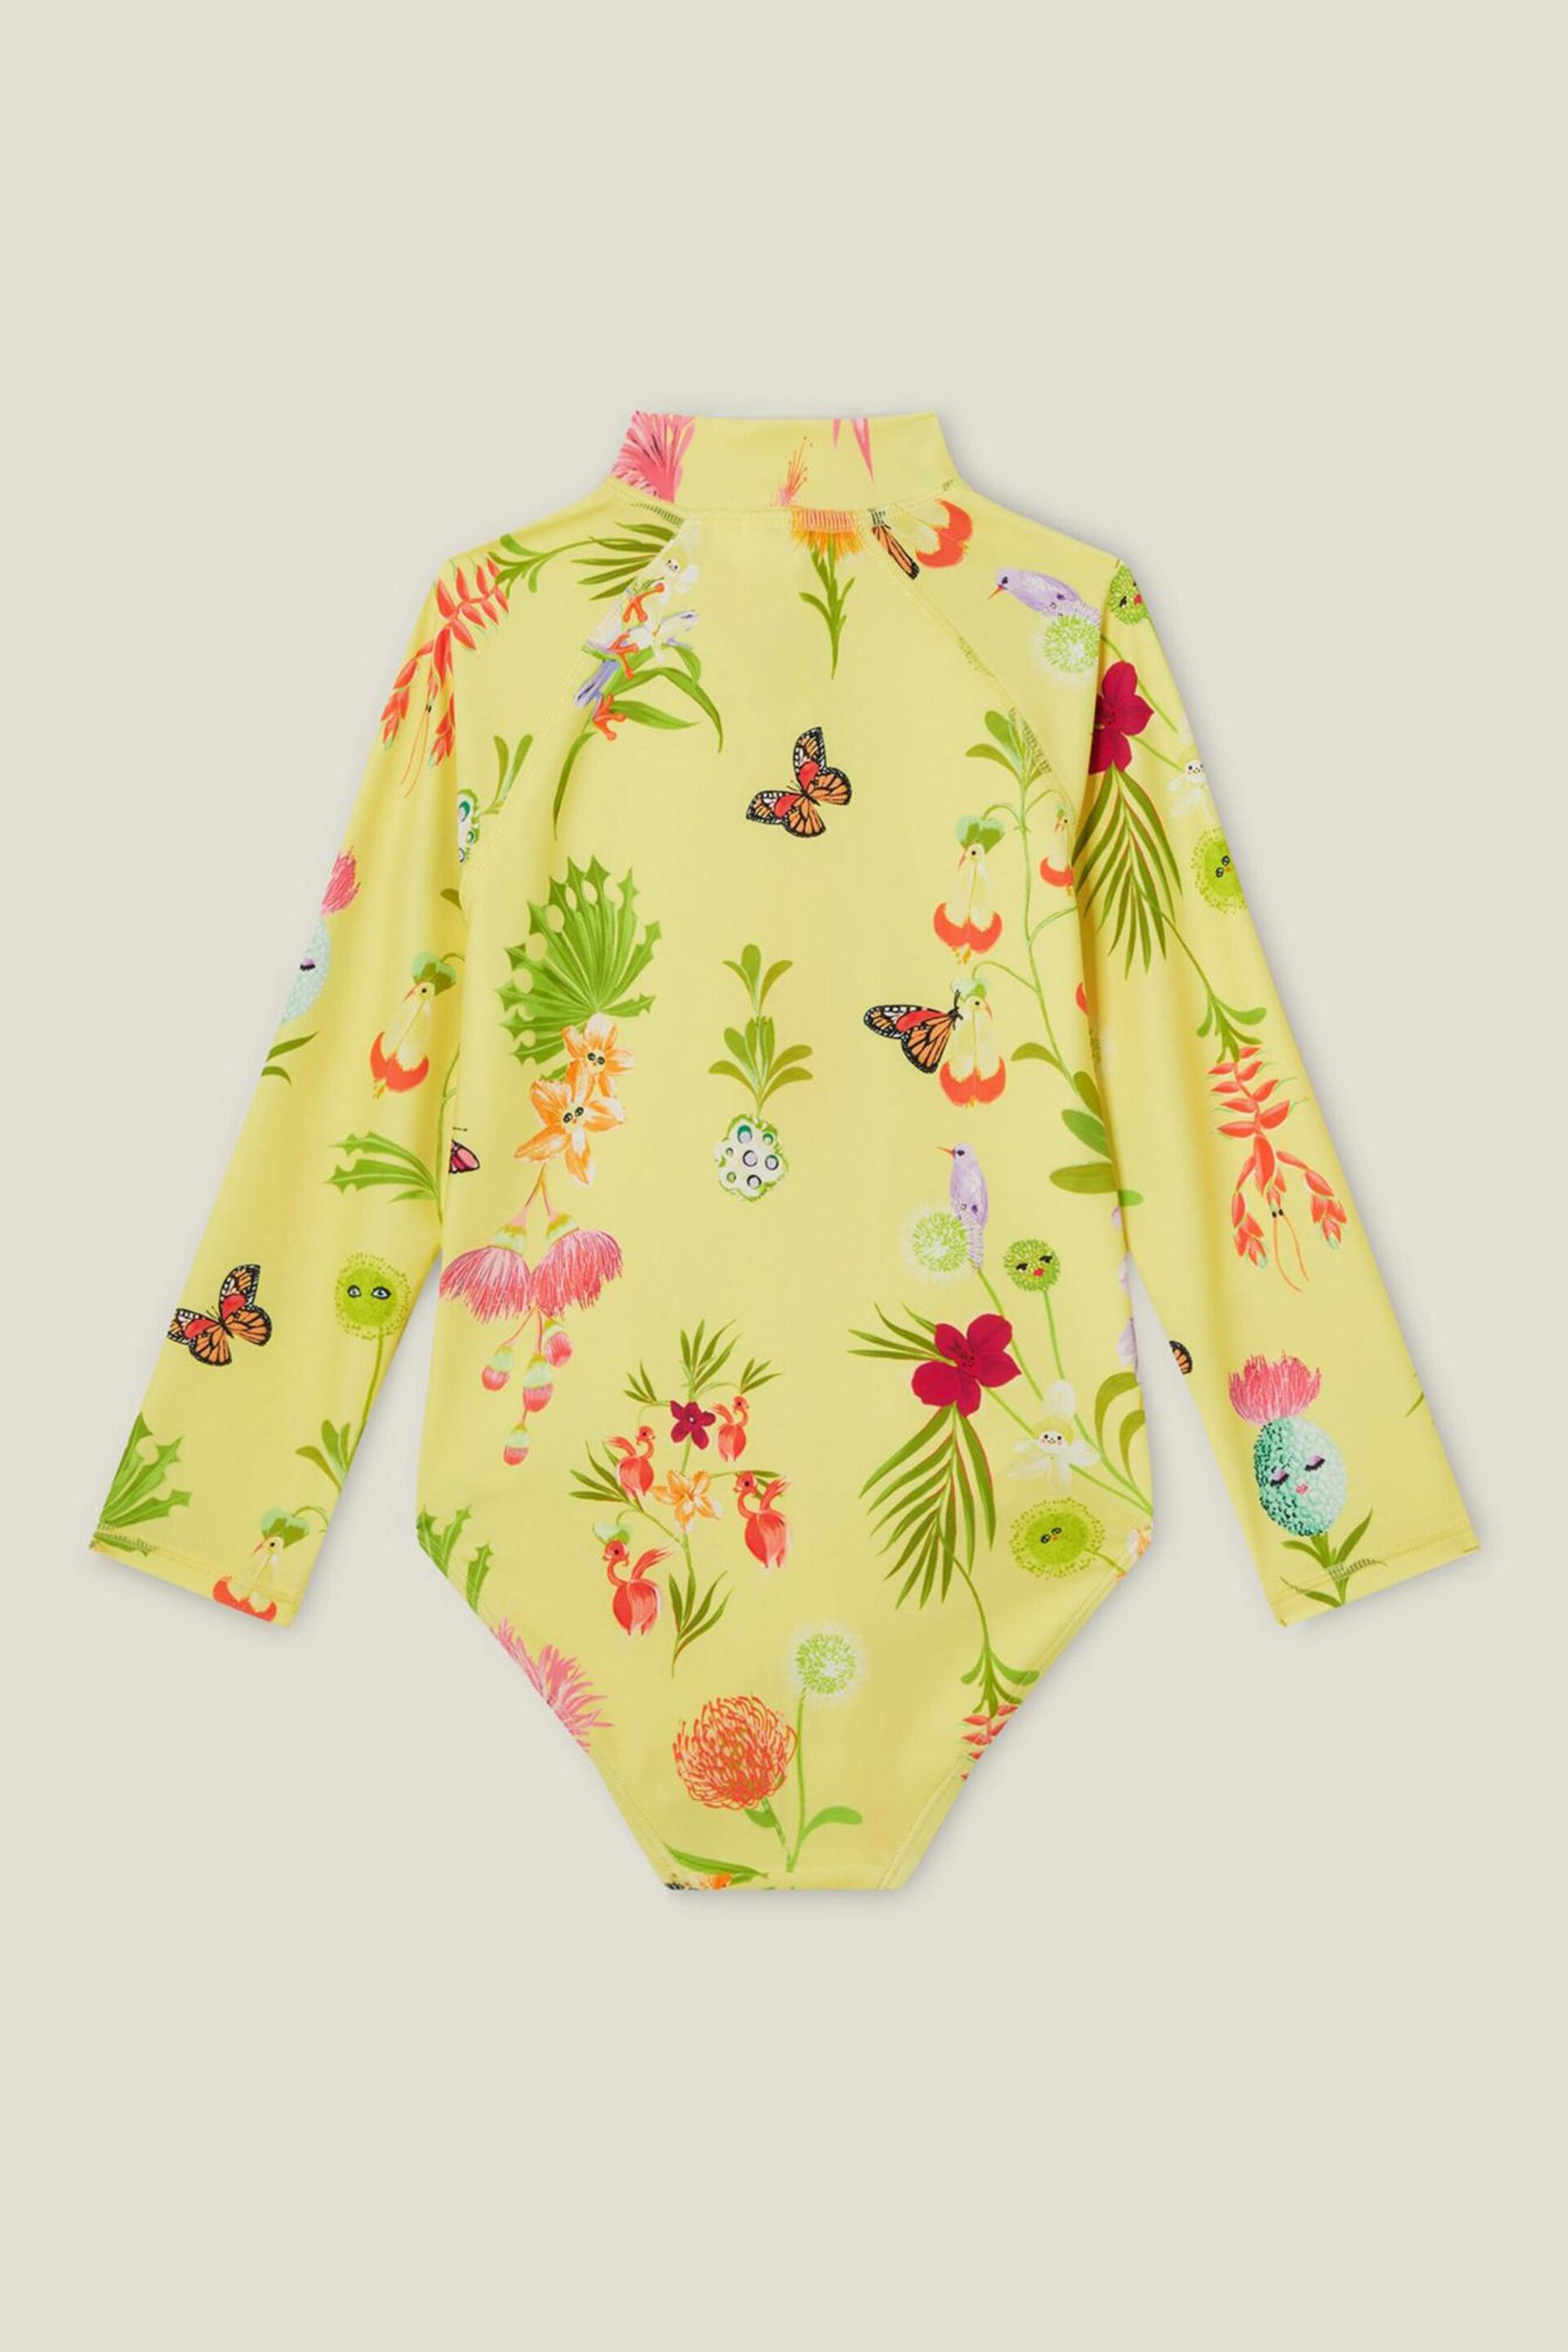 Angels By Accessorize Girls Yellow Long Sleeve Floral Swimsuit - Image 2 of 2